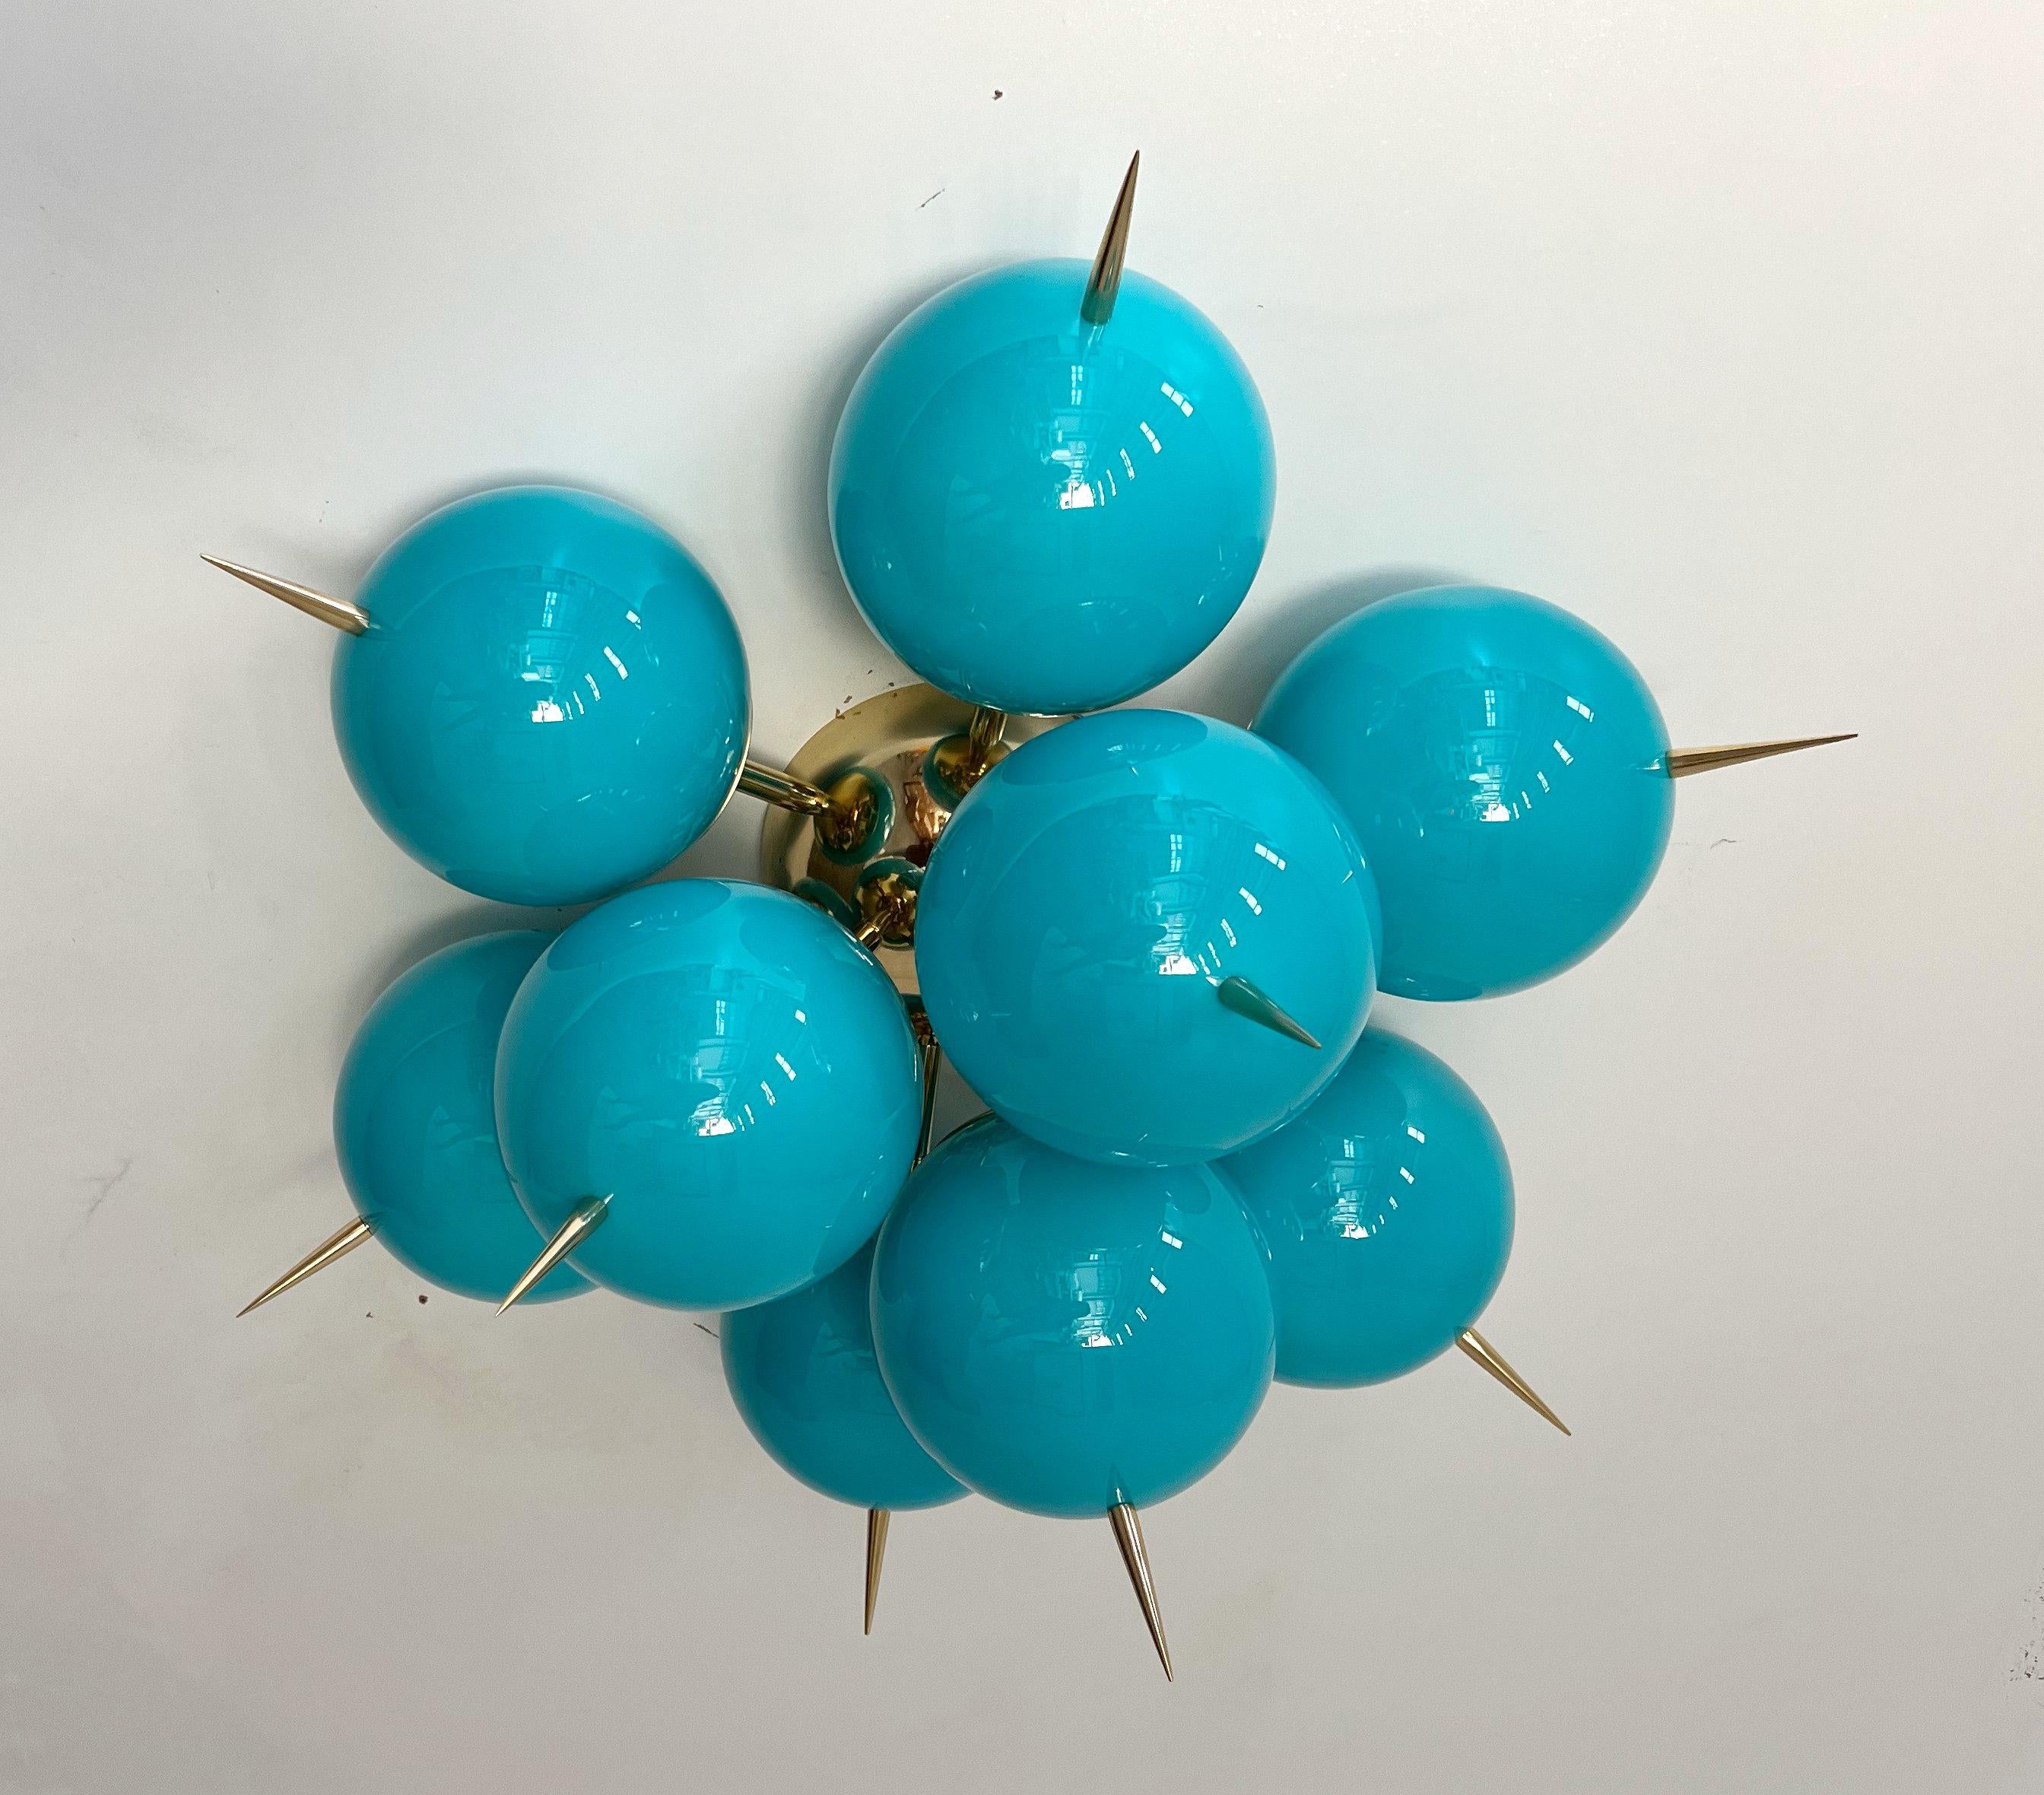 Italian sputnik flush mount with 9 Tiffany blue Murano glass globes and solid brass spikes mounted on  brass frame / Designed by Fabio Bergomi for Fabio Ltd / Made in Italy
9 lights / E12 or E14 type / max 40W each
Measures: Diameter 25 inches,